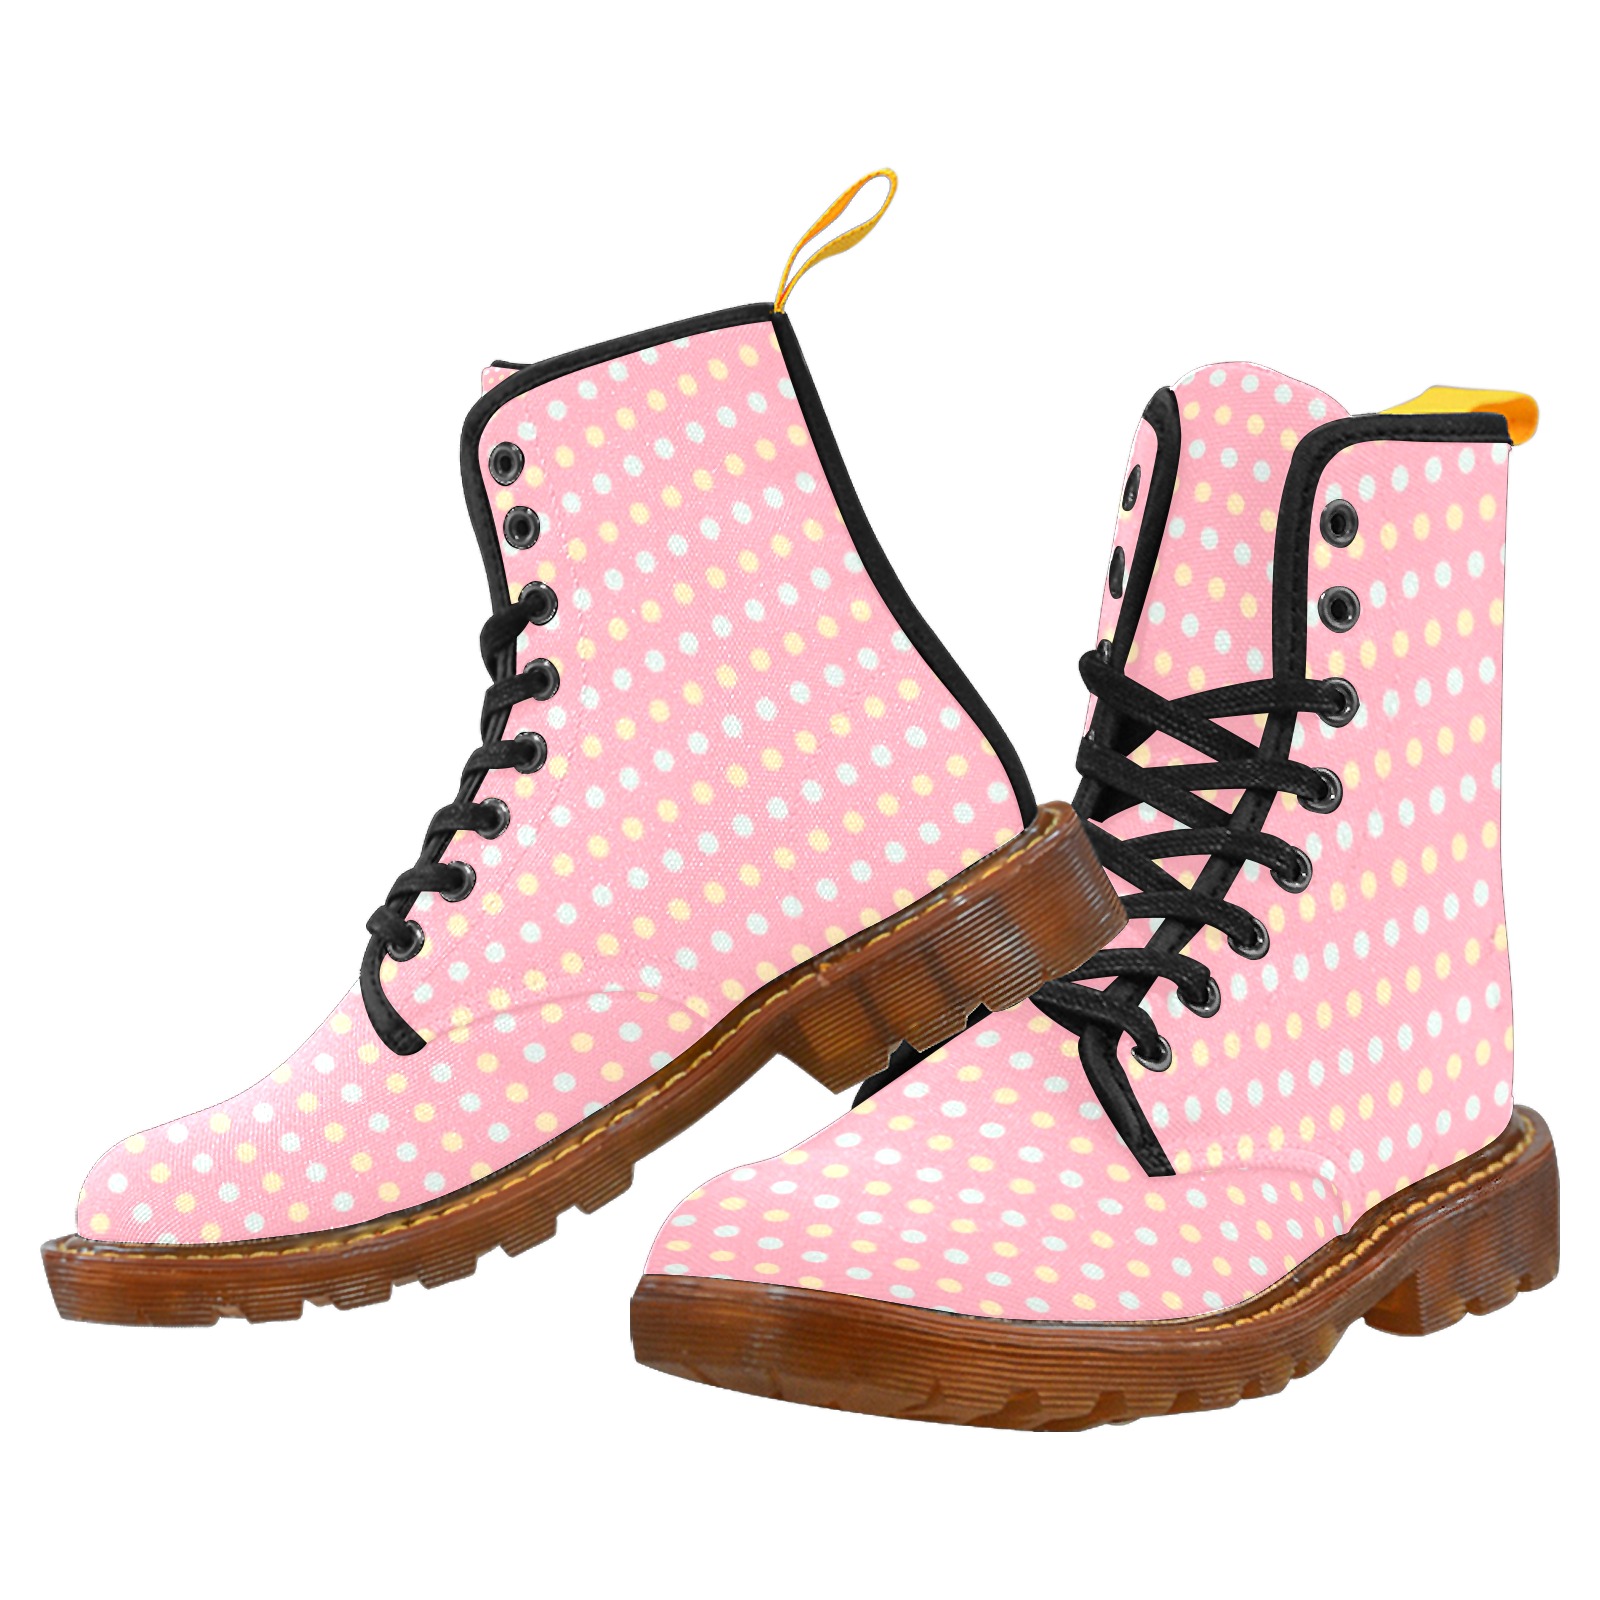 Colorful Dots On Pink Martin Boots For Women Model 1203H